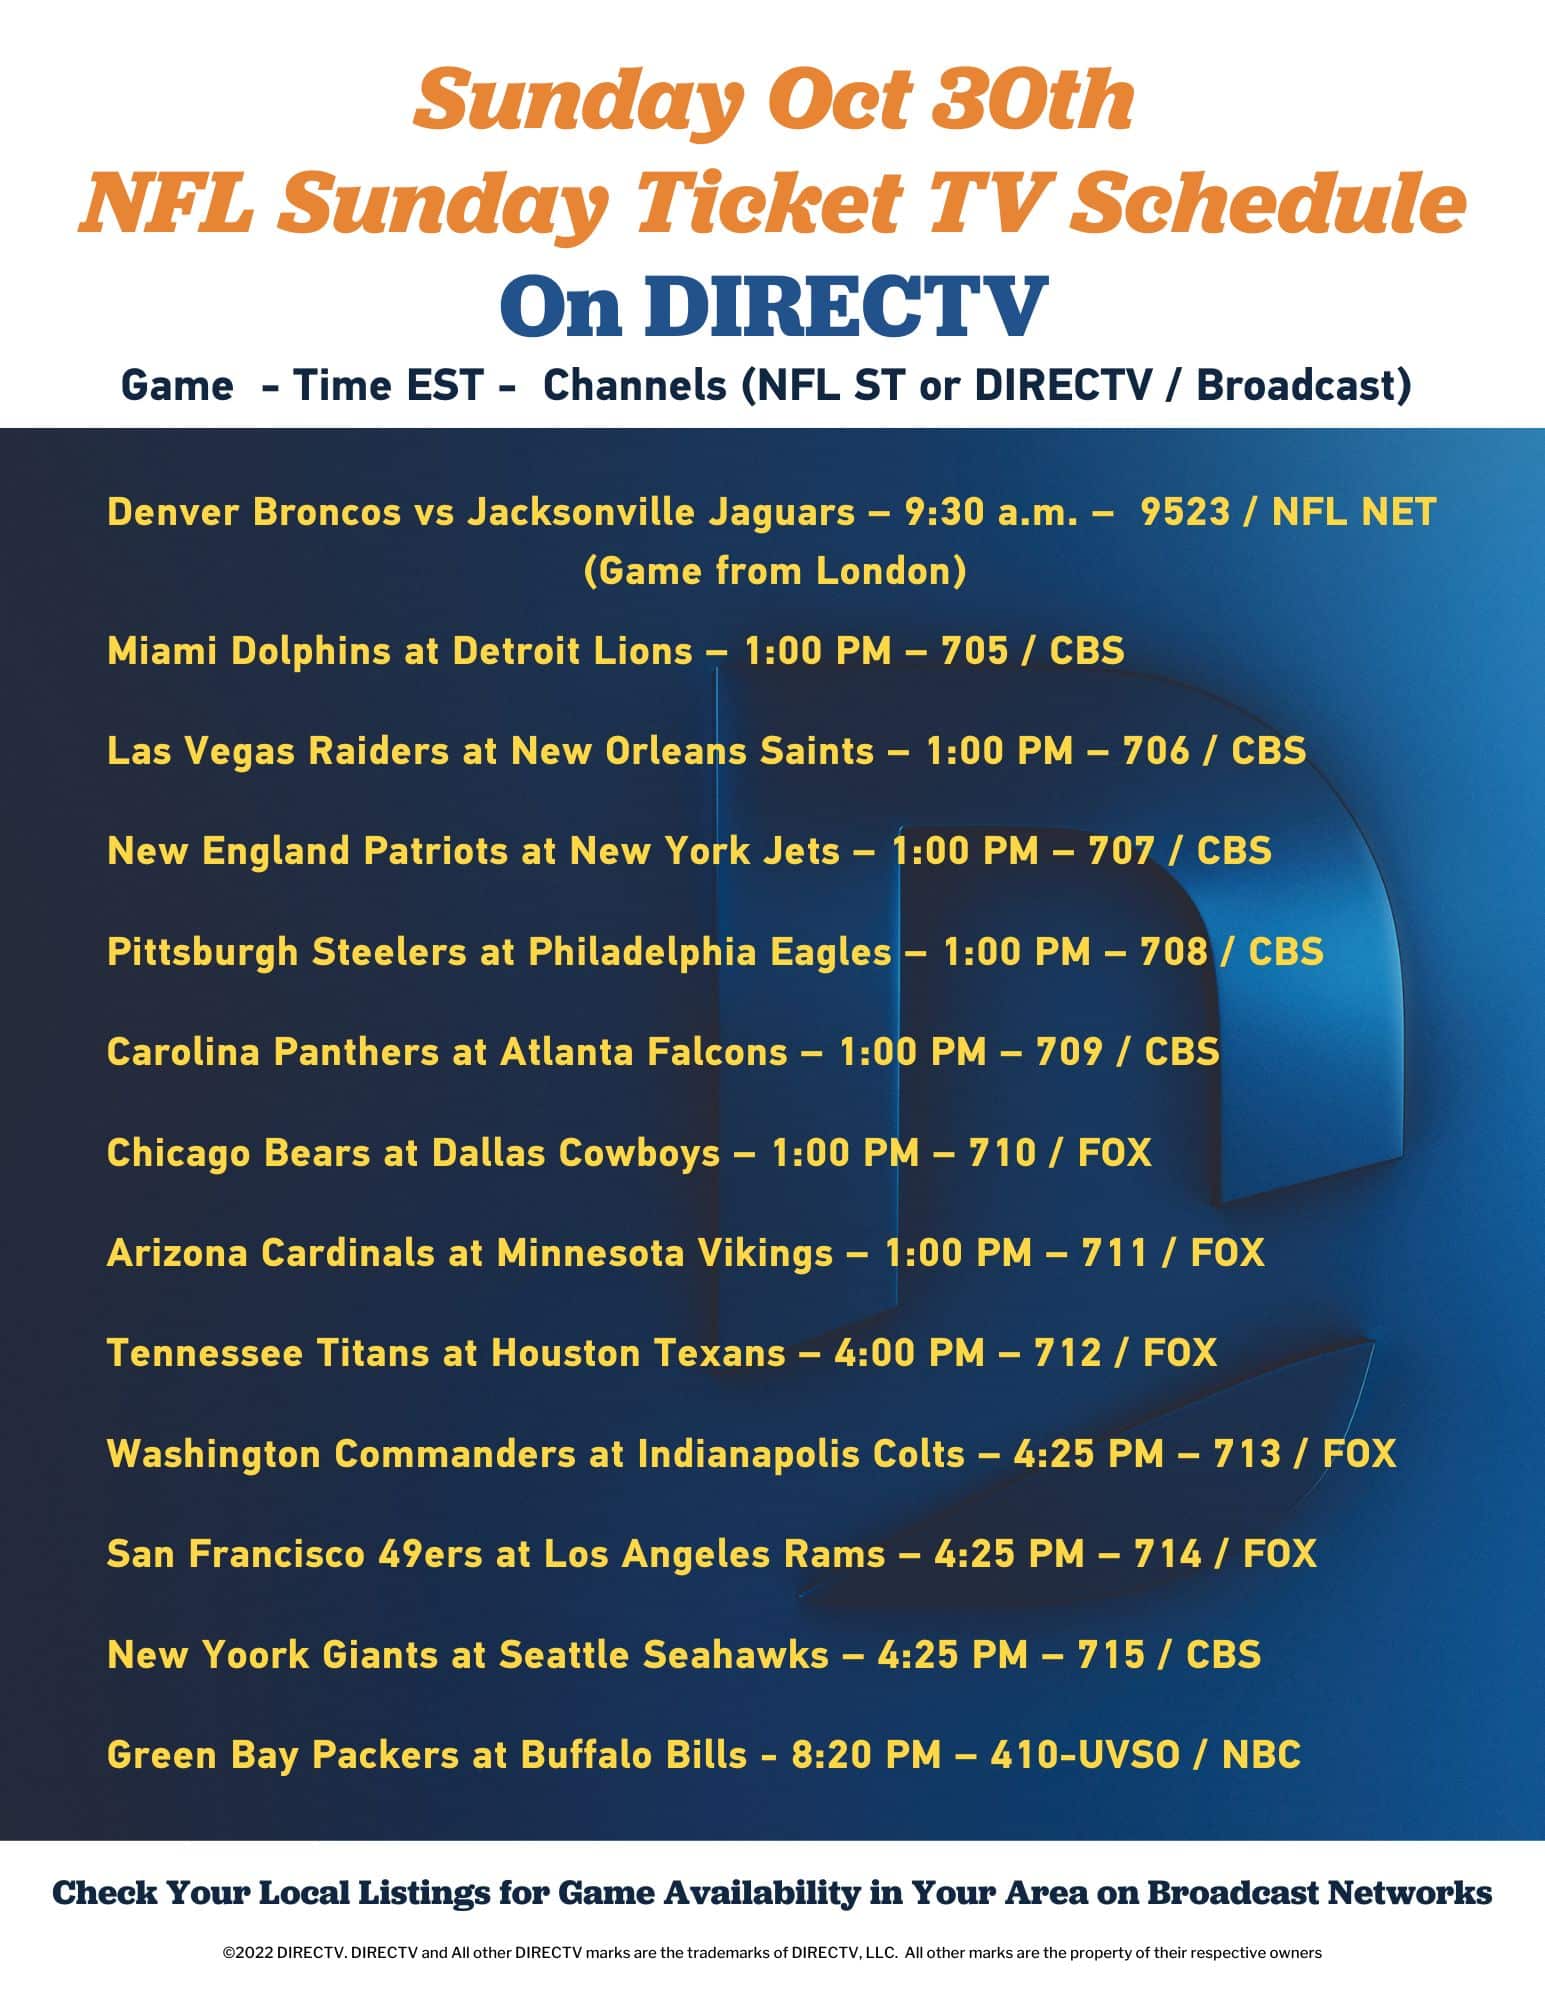 Wondering What Time and DIRECTV Channel the NFL Football Games are on